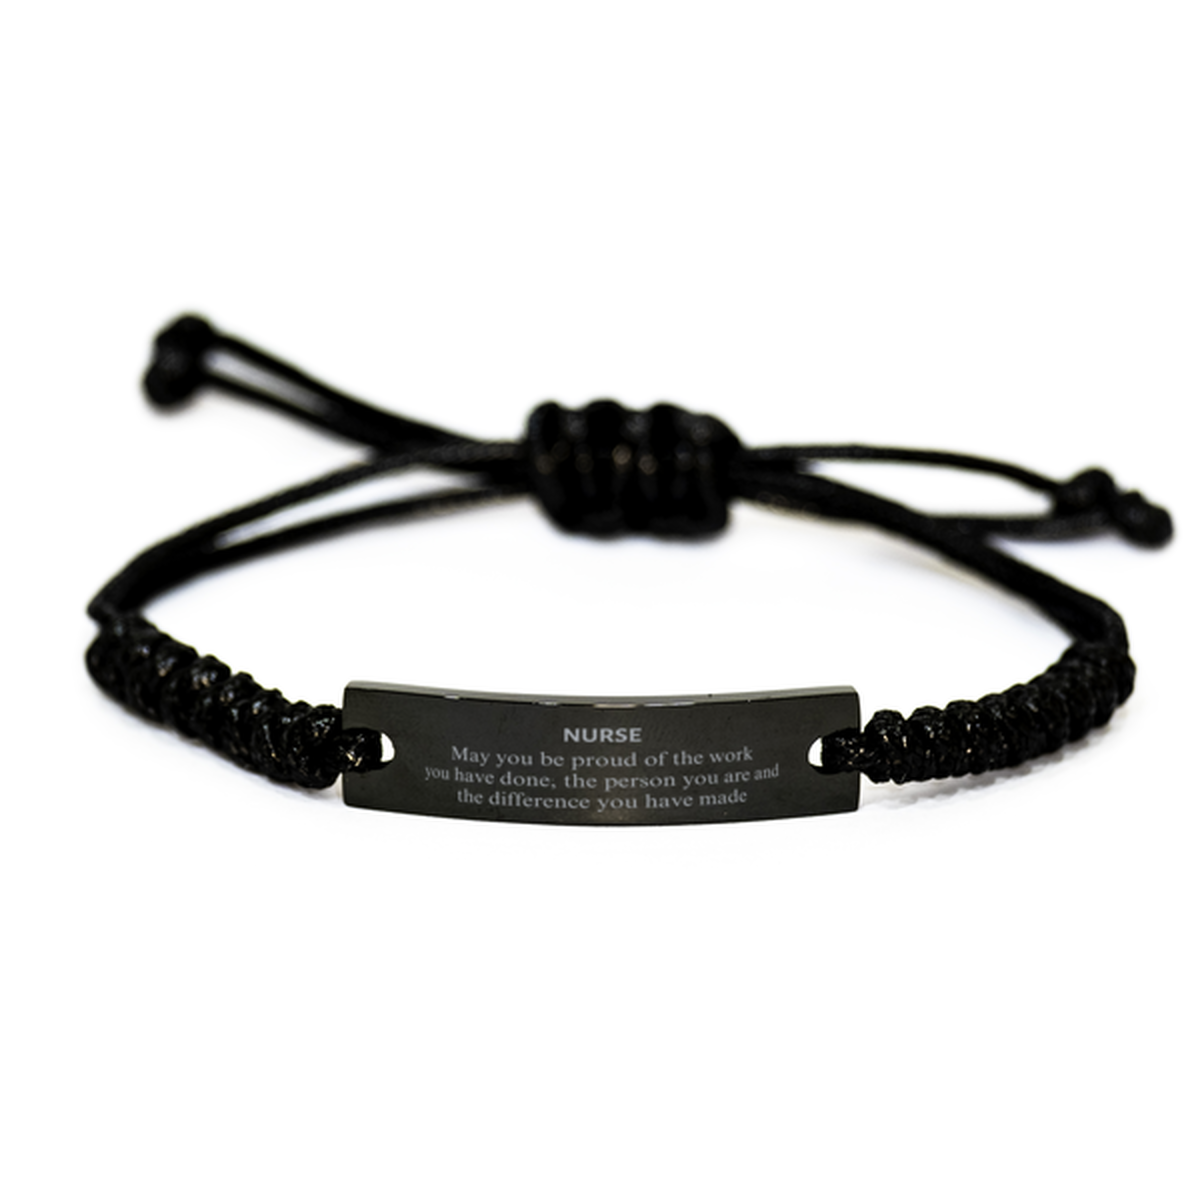 Nurse May you be proud of the work you have done, Retirement Nurse Black Rope Bracelet for Colleague Appreciation Gifts Amazing for Nurse